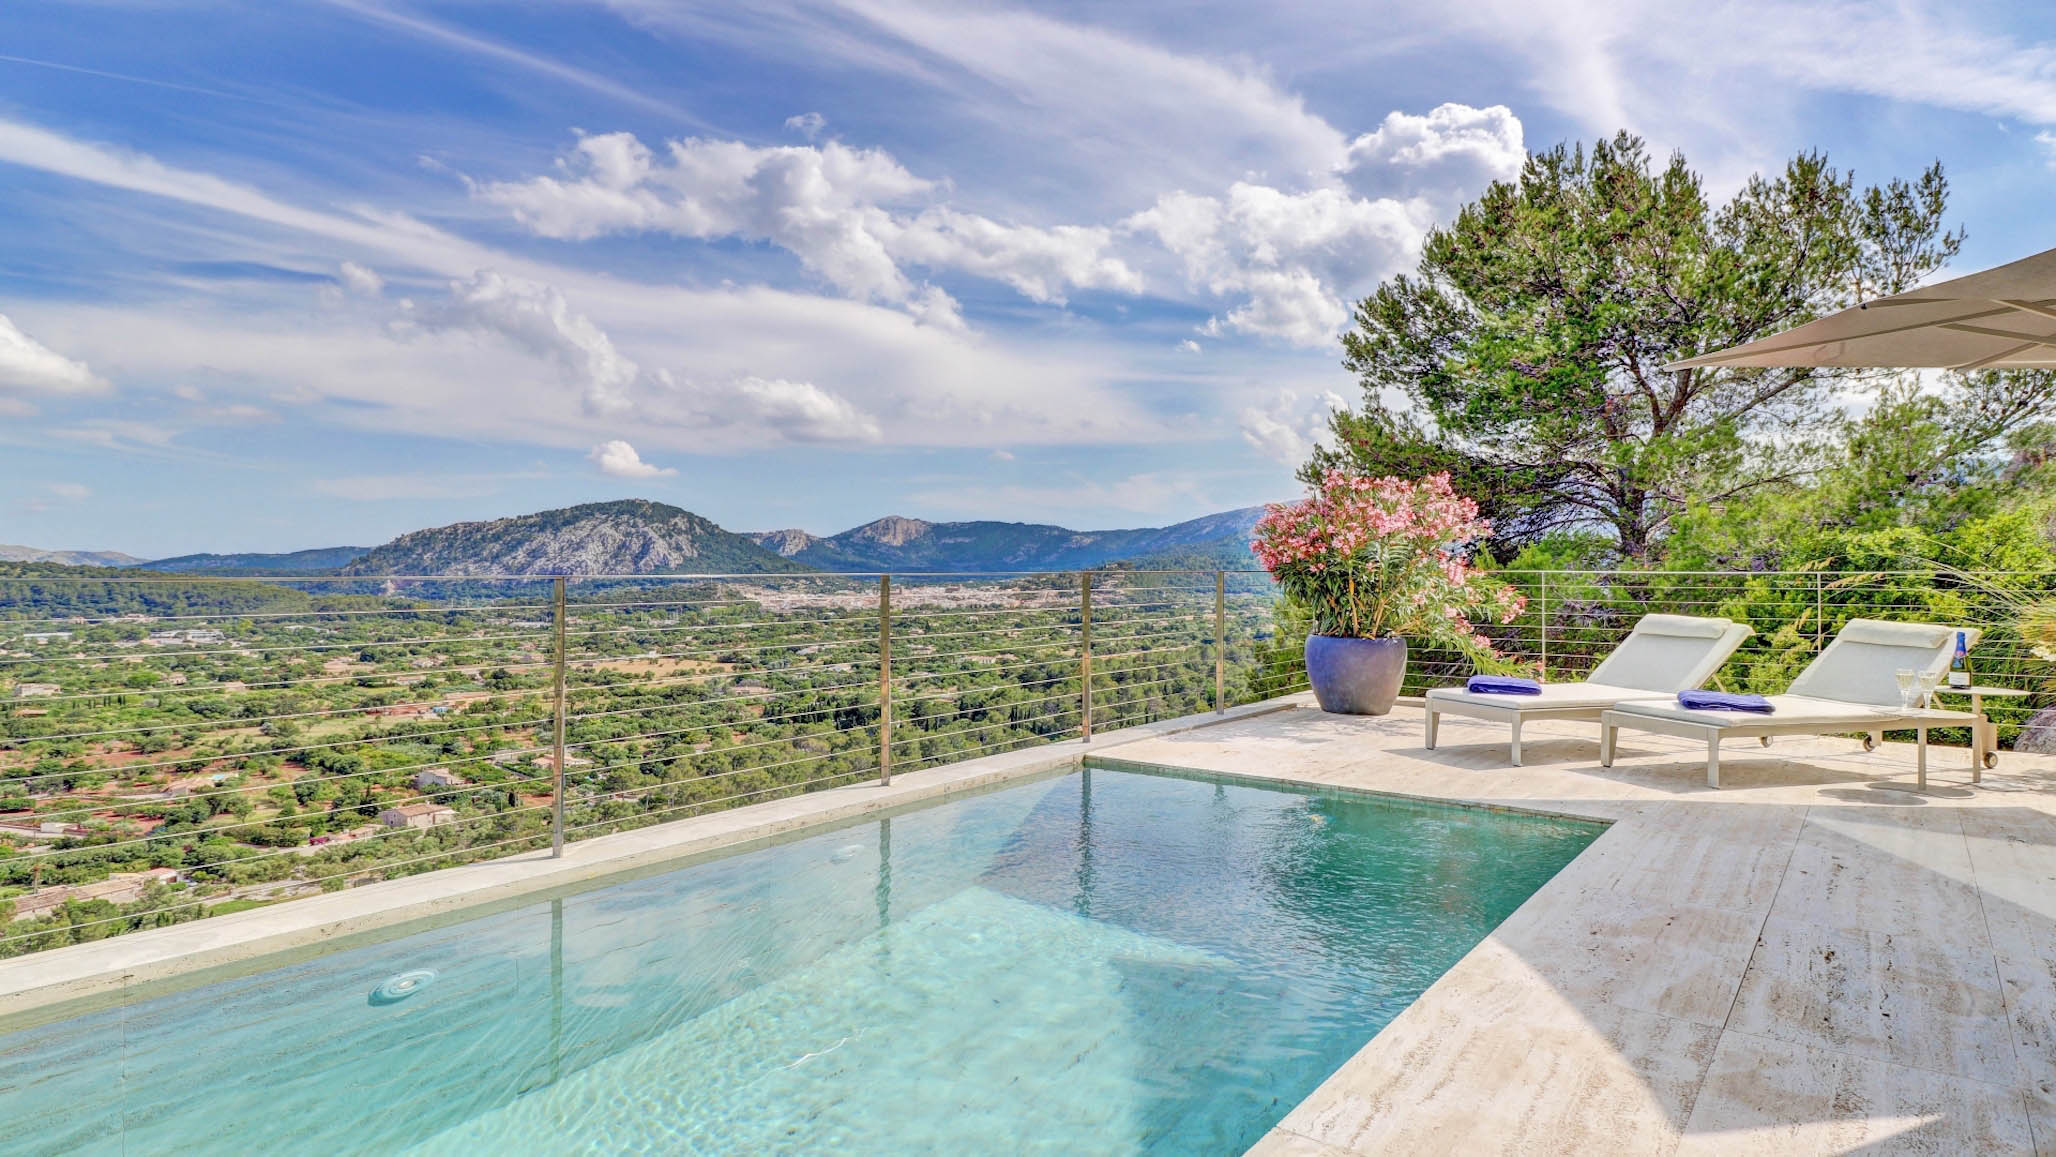 Property Image 1 - Stunning Modern Villa Built into a Mountain with Sea View near Pollensa